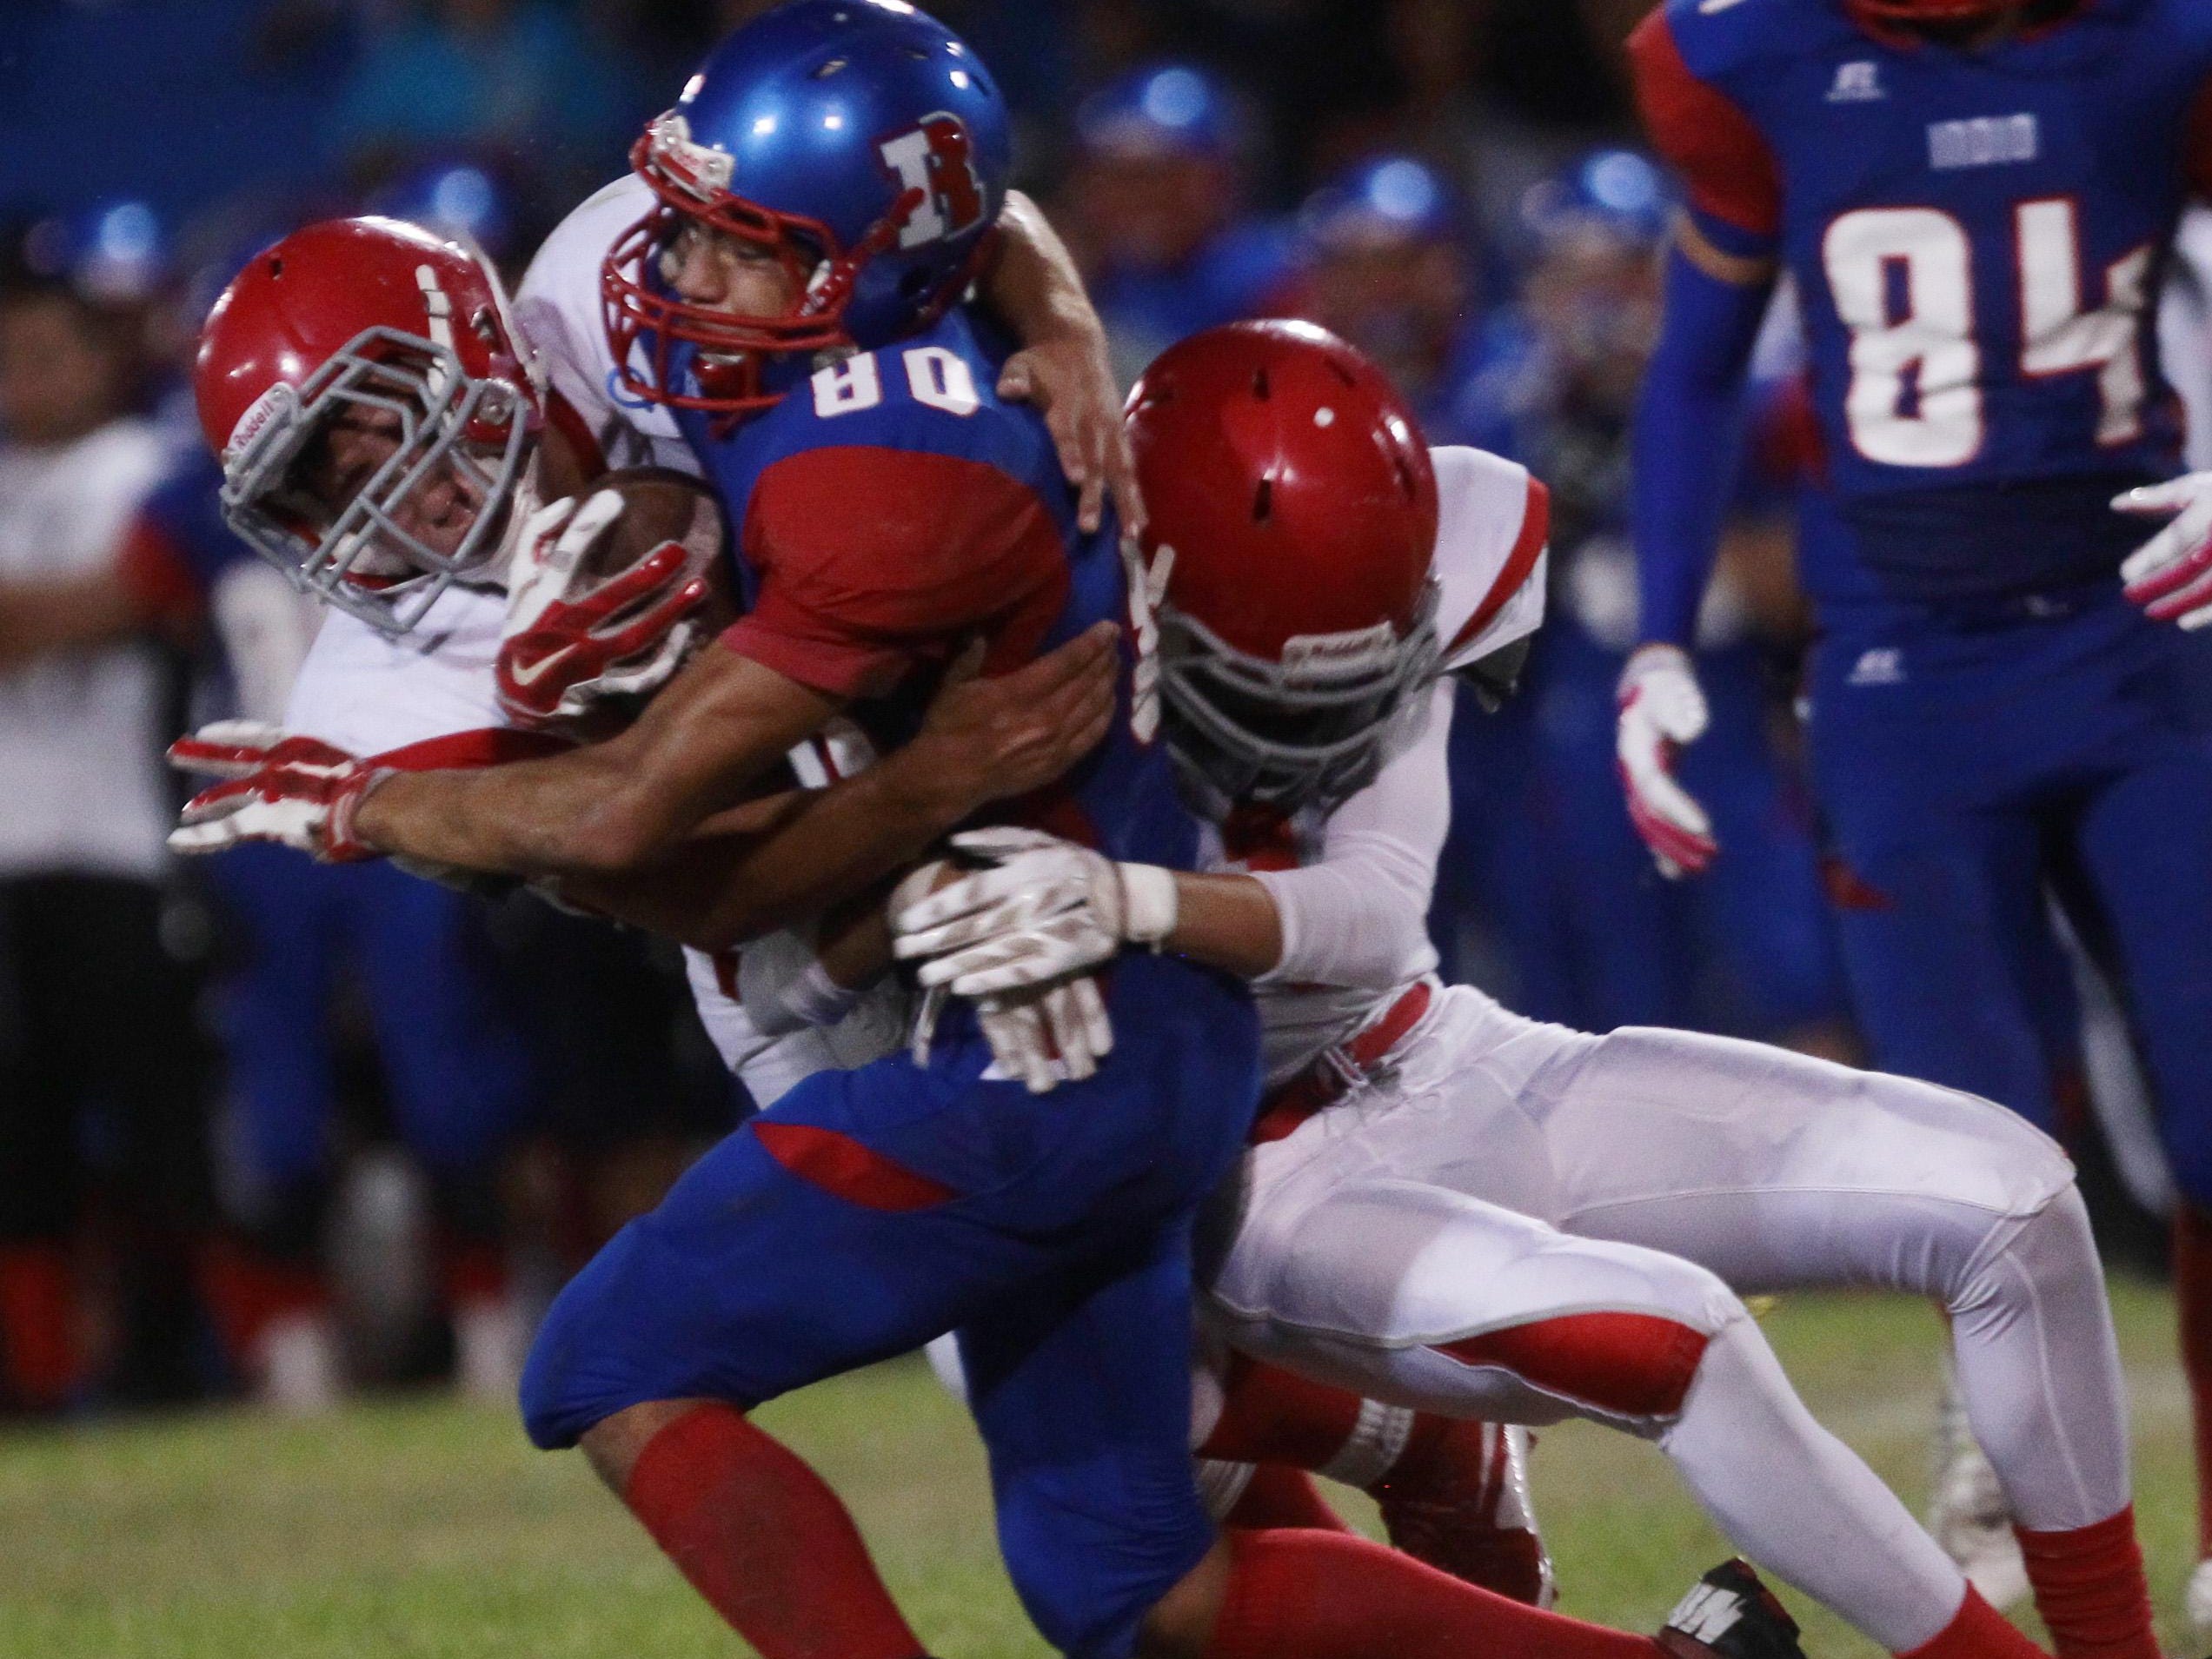 From Left, Desert Mirage High School defenders Jaime Serrano and Dylan Arreola take down Indio High School's Brian Cervantes at Ed White Stadium in Indio on August 28, 2015.